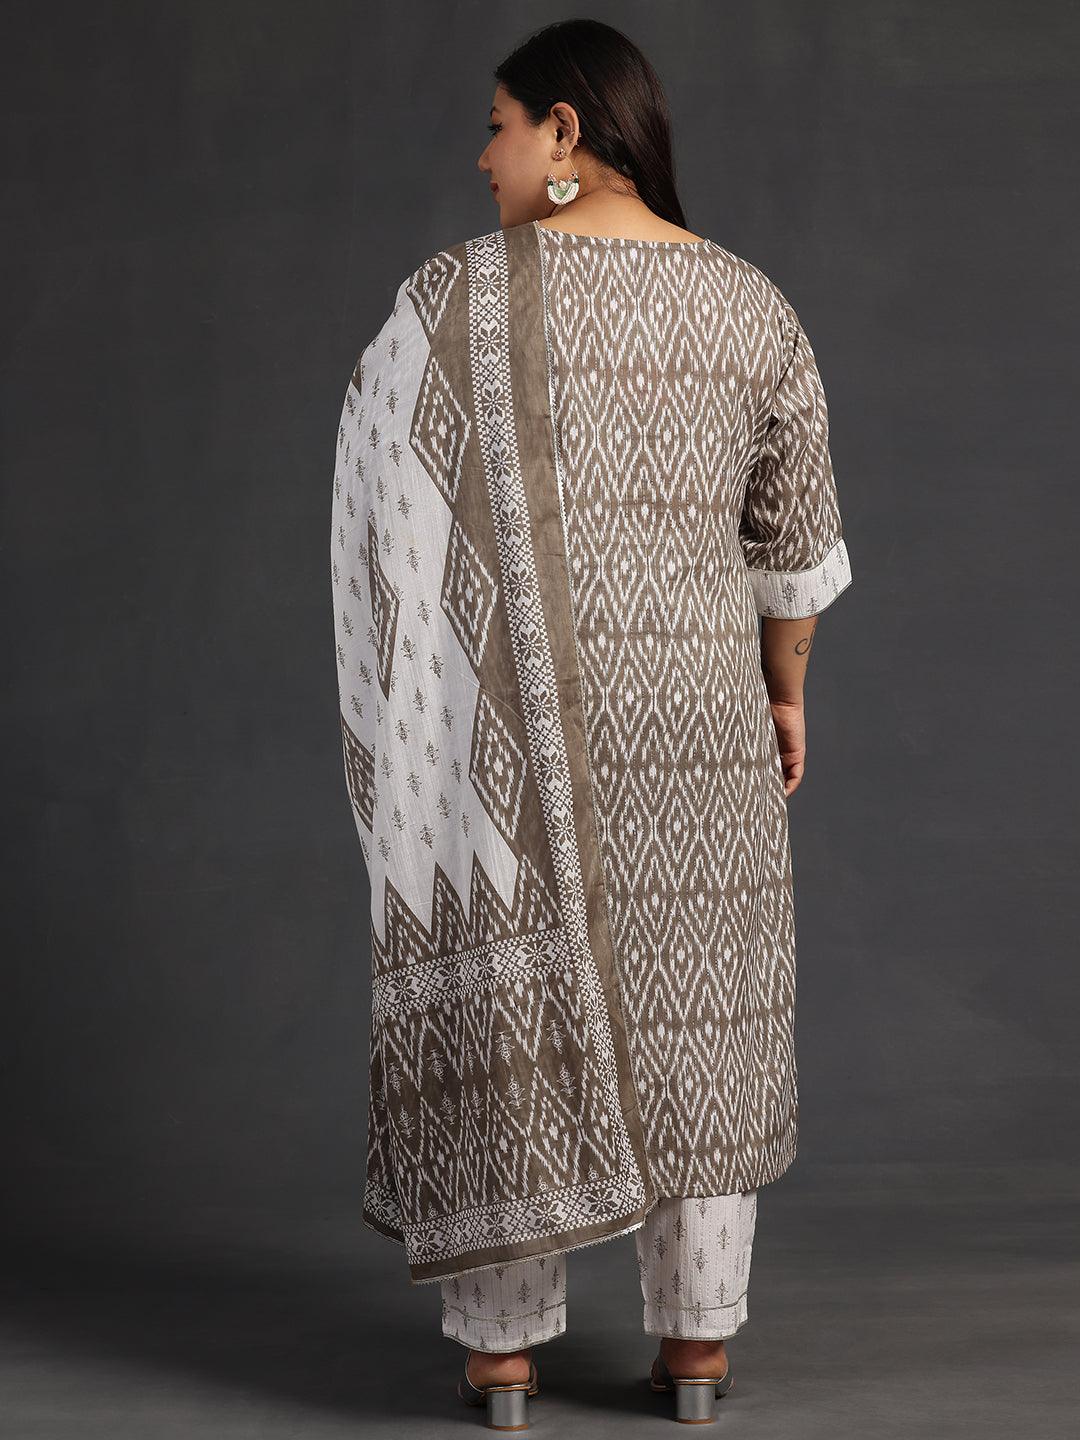 Plus Size Grey Printed Cotton Straight Suit With Dupatta - Libas